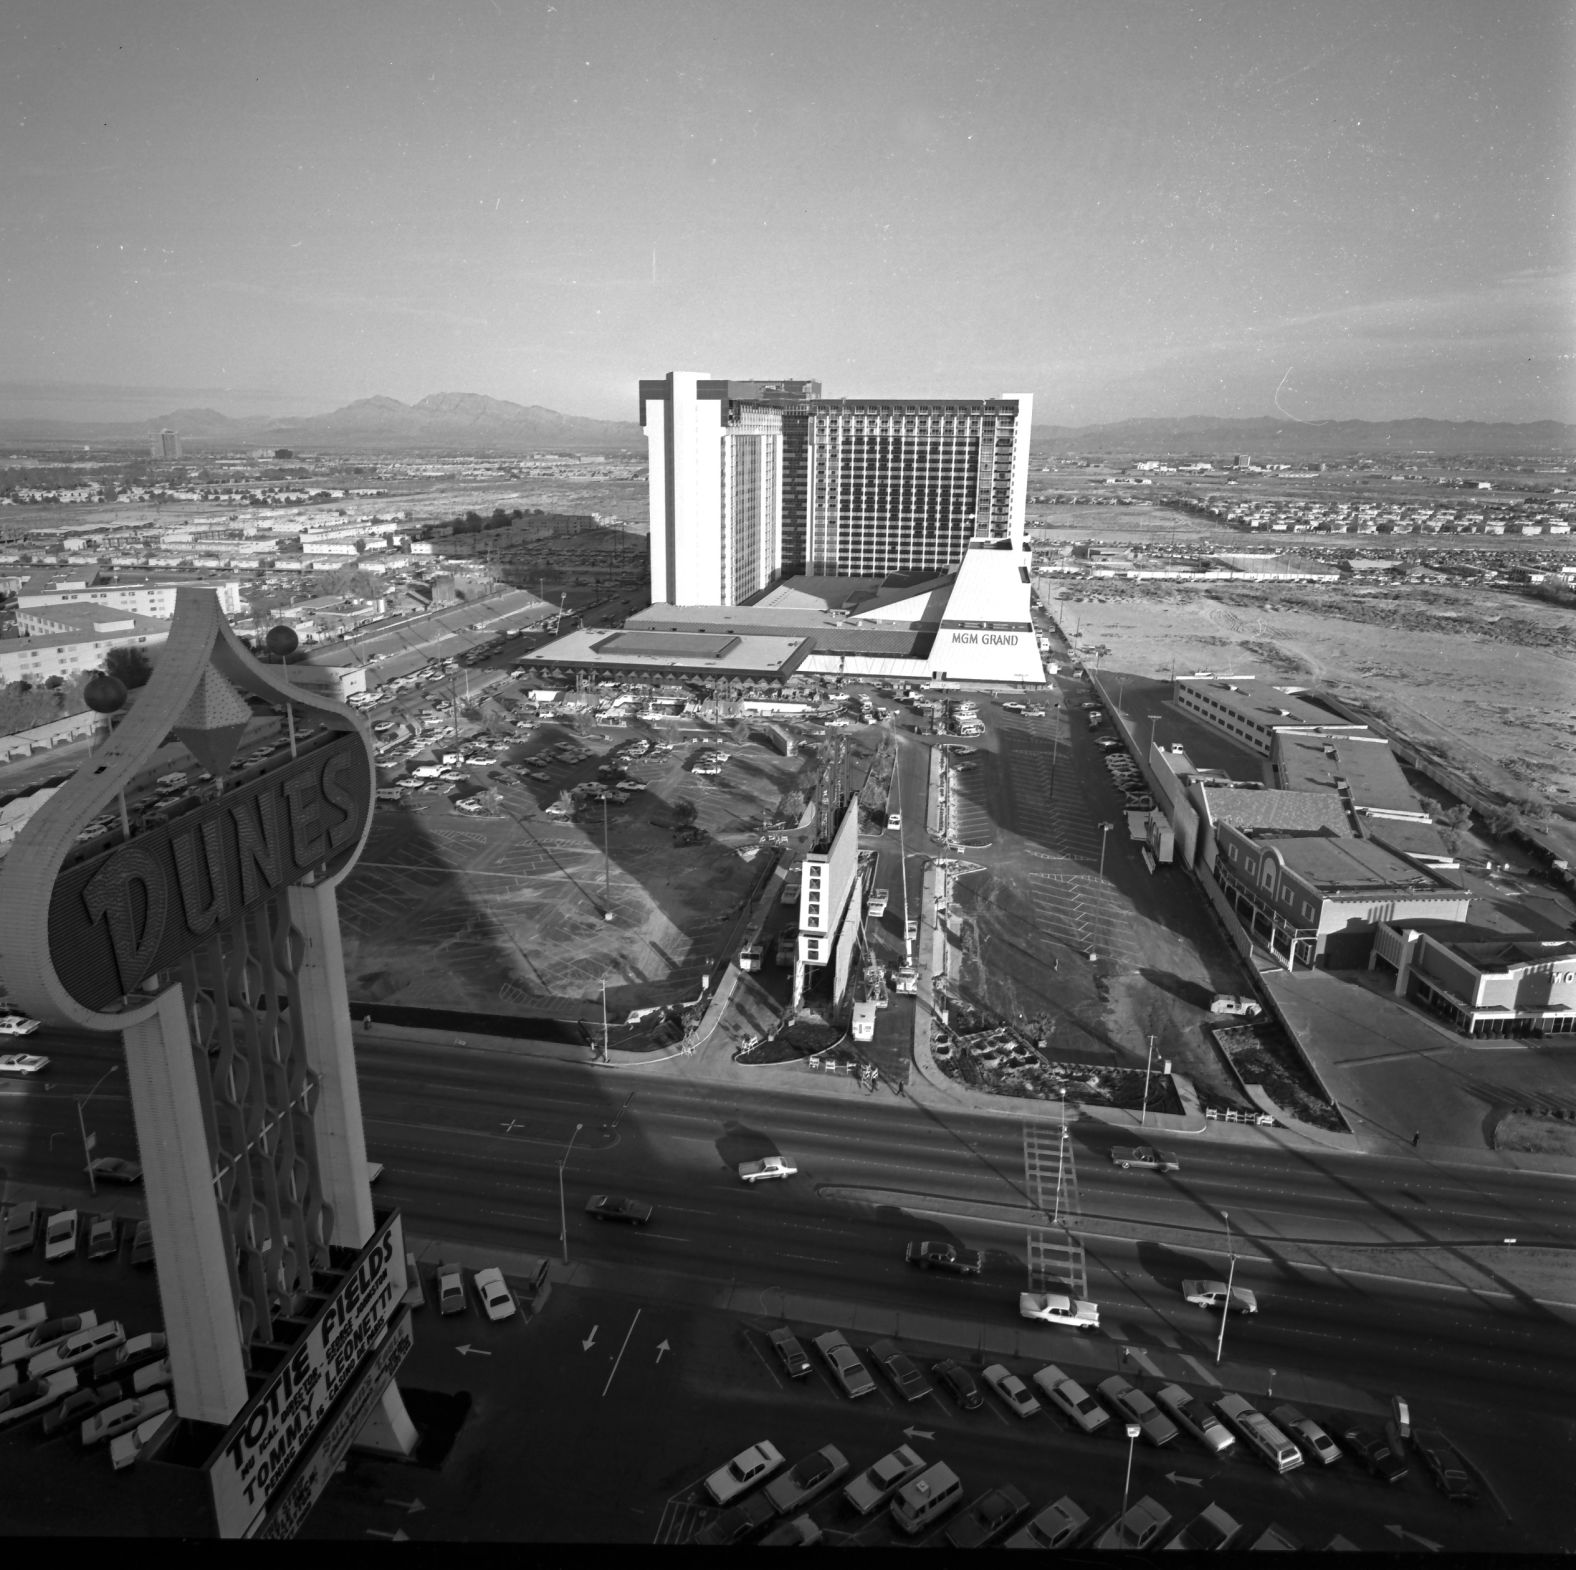 The Dunes Hotel is seen in the foreground, with the MGM Grand behind it in 1973. The Las Vegas skyline is always changing and evolving.